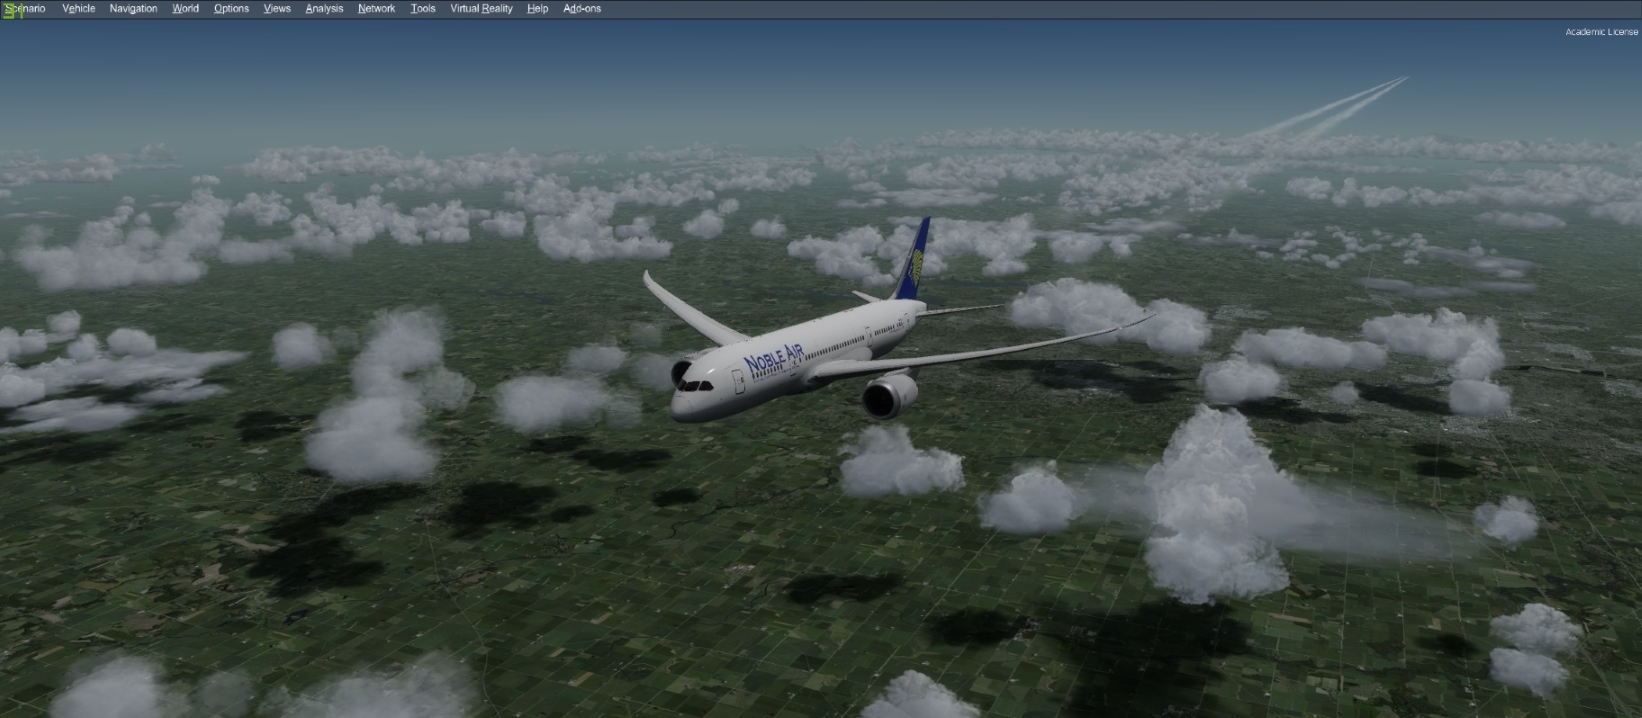 Cruising at FL400 from KPHL to KLAX